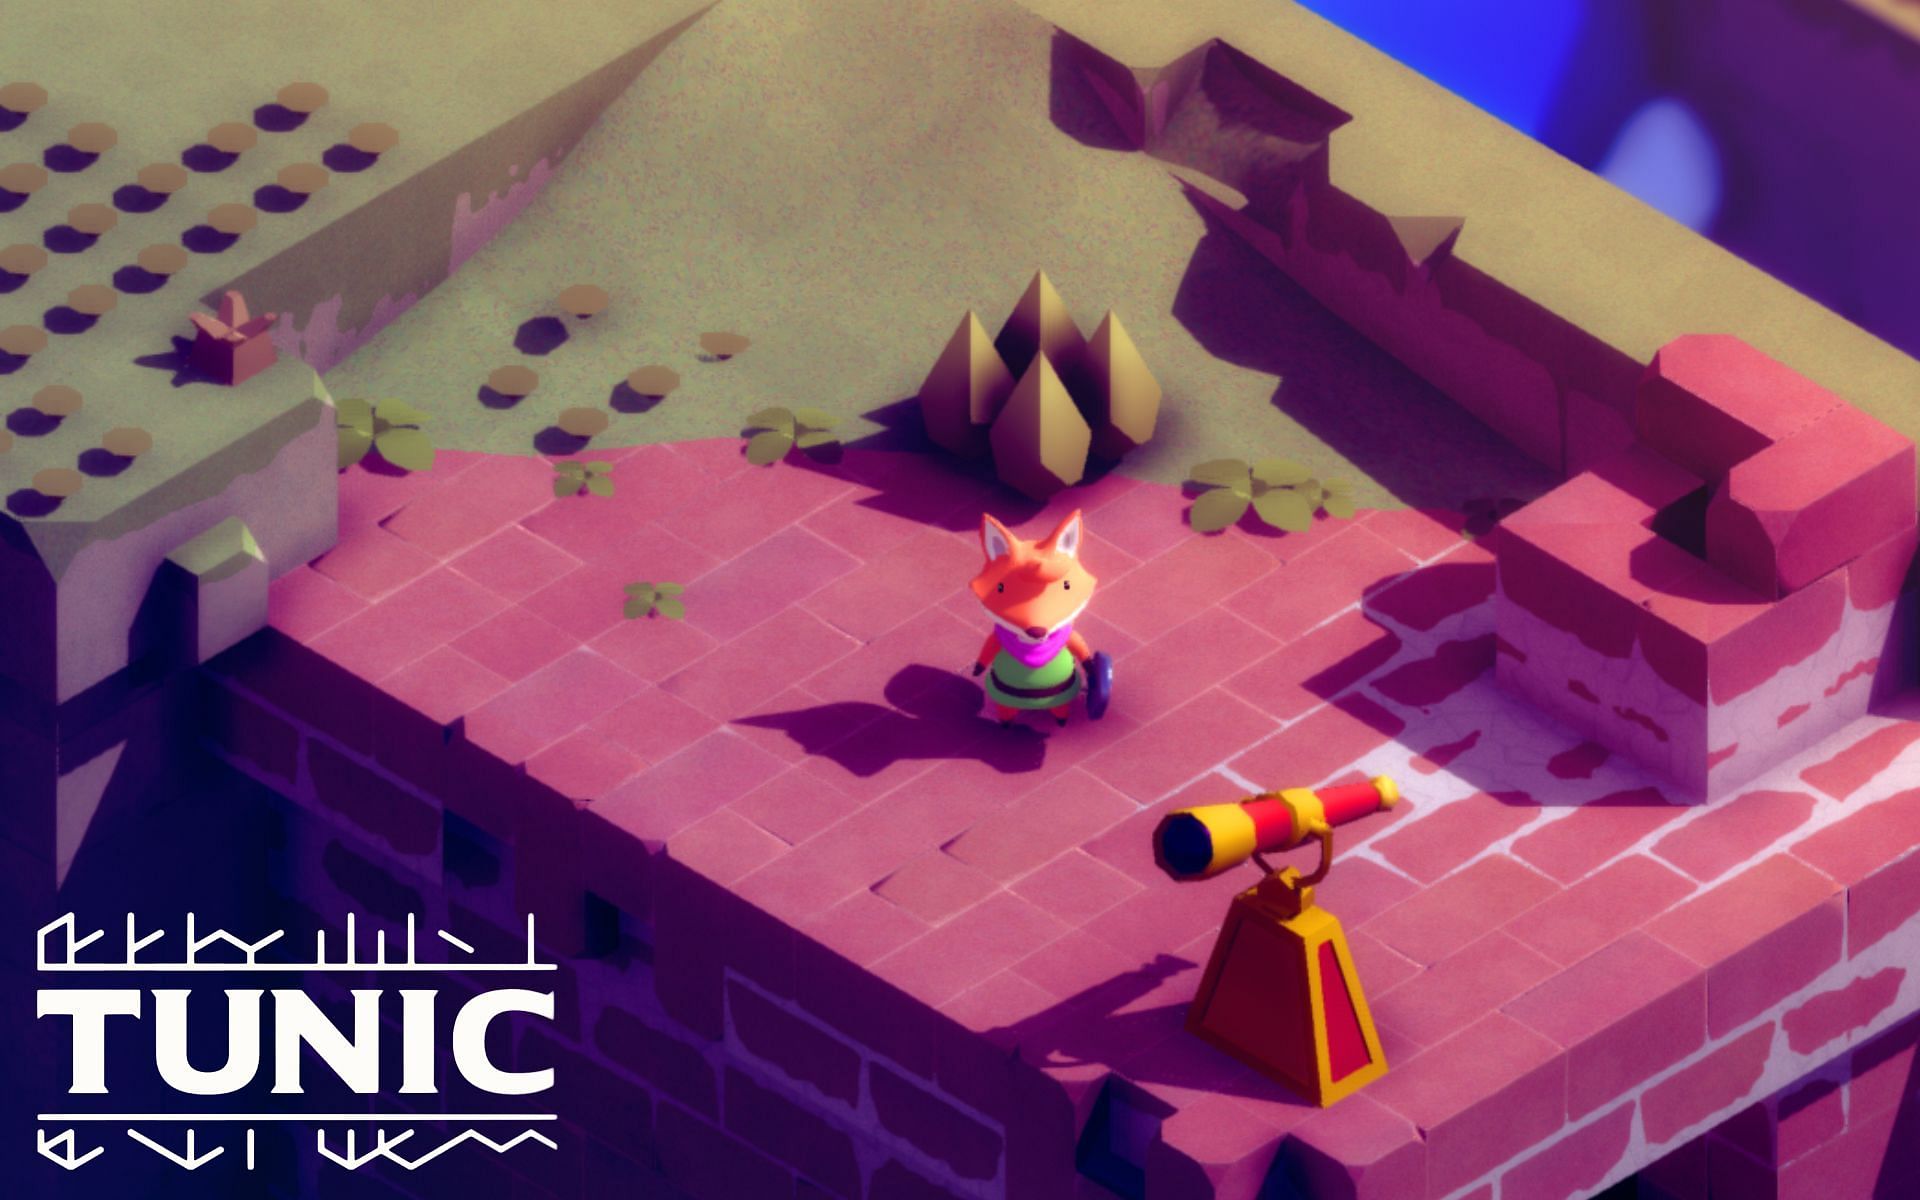 TUNIC is an upcoming action-adventure indie game from Finji (Image via TUNIC)